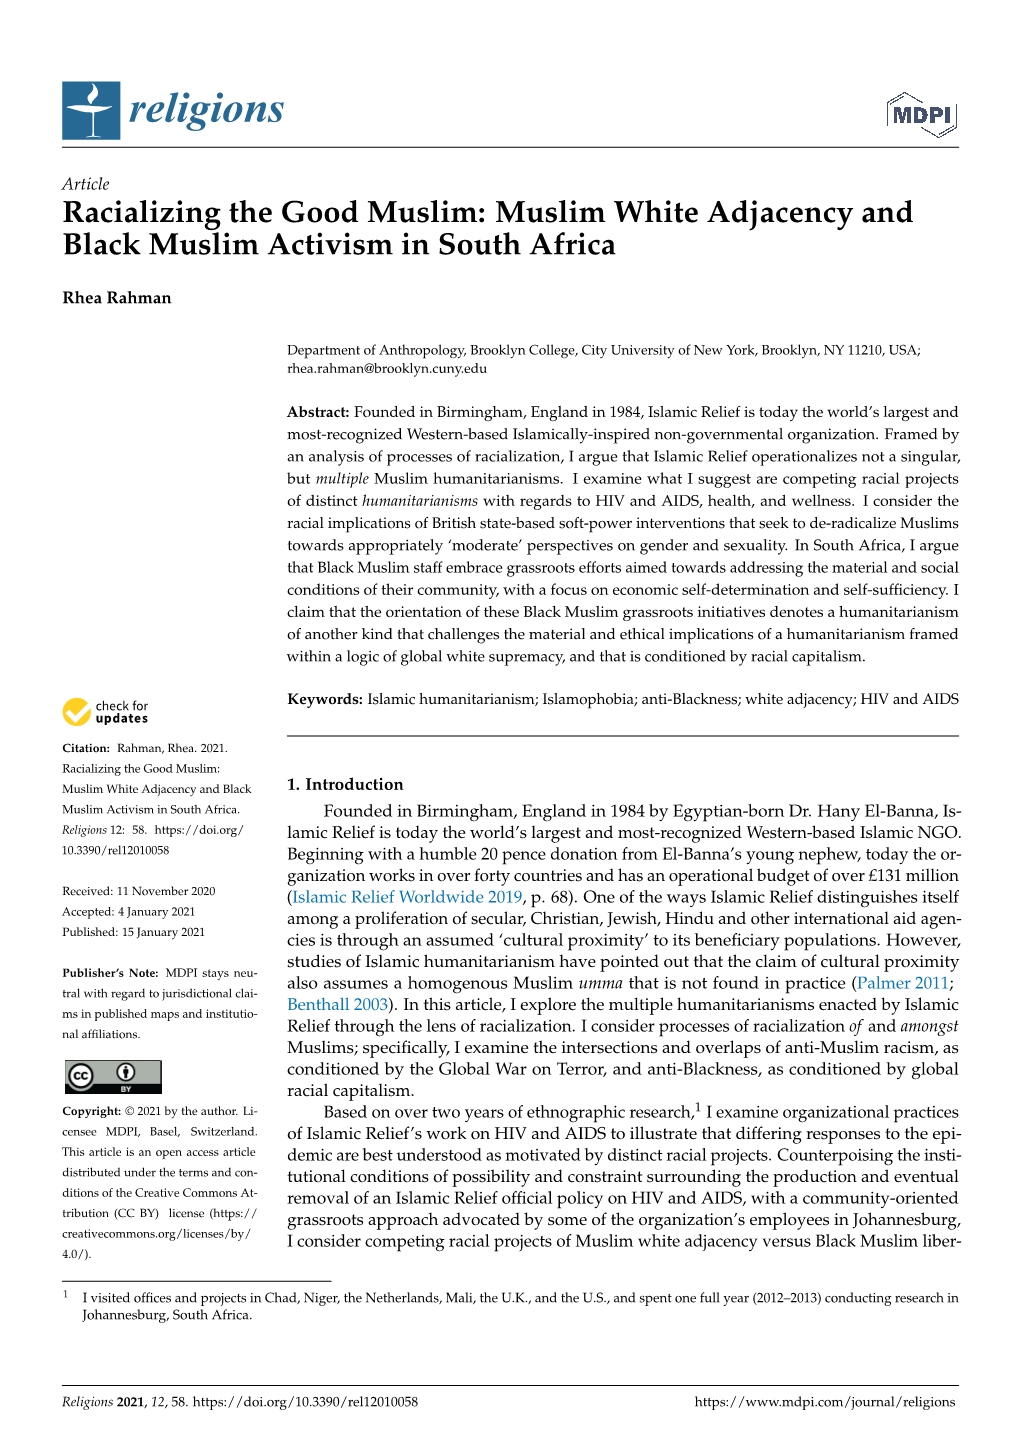 Racializing the Good Muslim: Muslim White Adjacency and Black Muslim Activism in South Africa